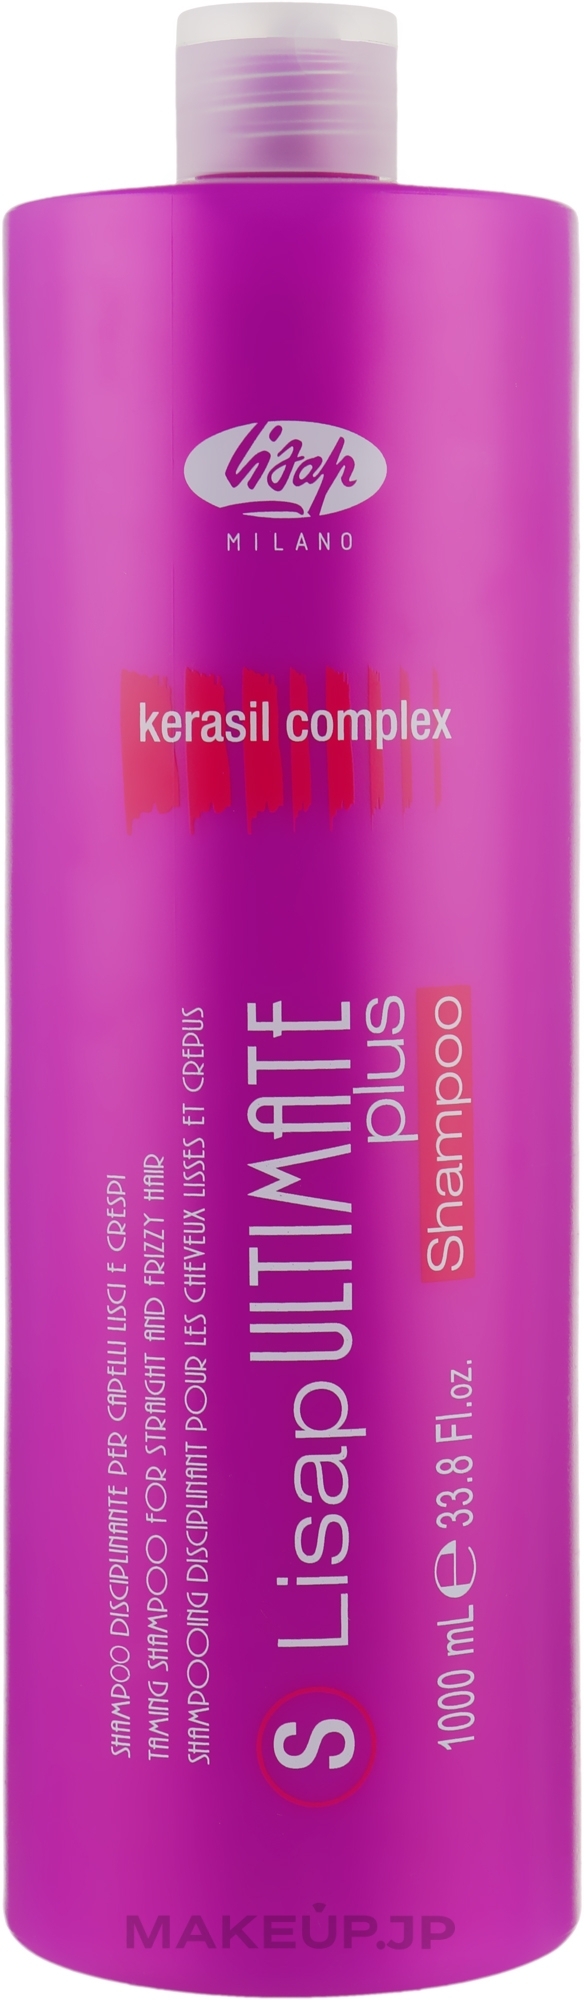 Smoothing Shampoo for Straight and Curly Hair - Lisap Milano Ultimate Plus Taming Shampoo — photo 1000 ml